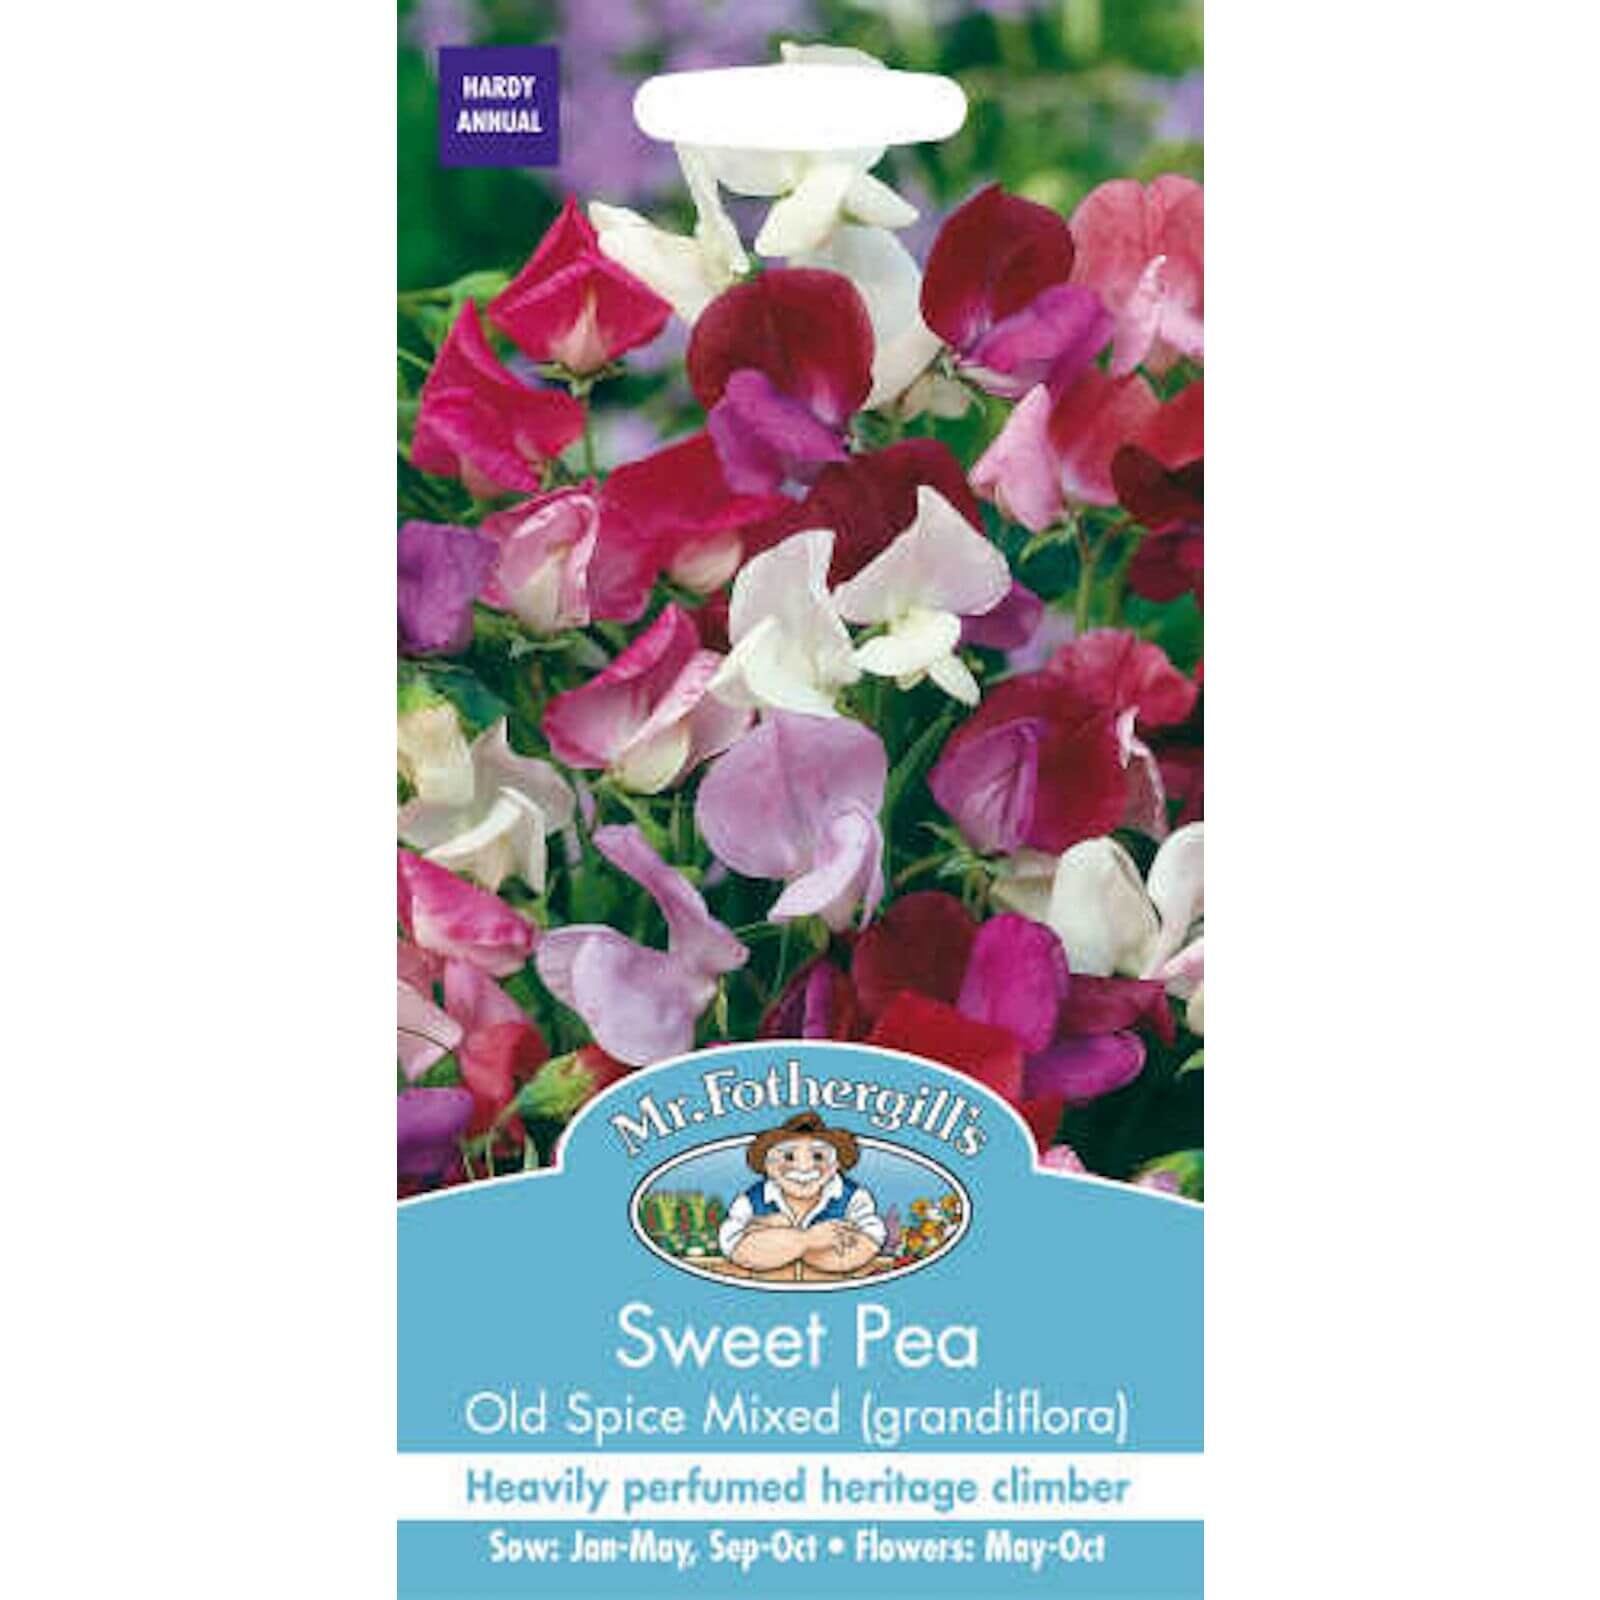 Mr. Fothergill's Sweet Pea Old Spice Mixed (Lathyrus Odoratus) Seeds